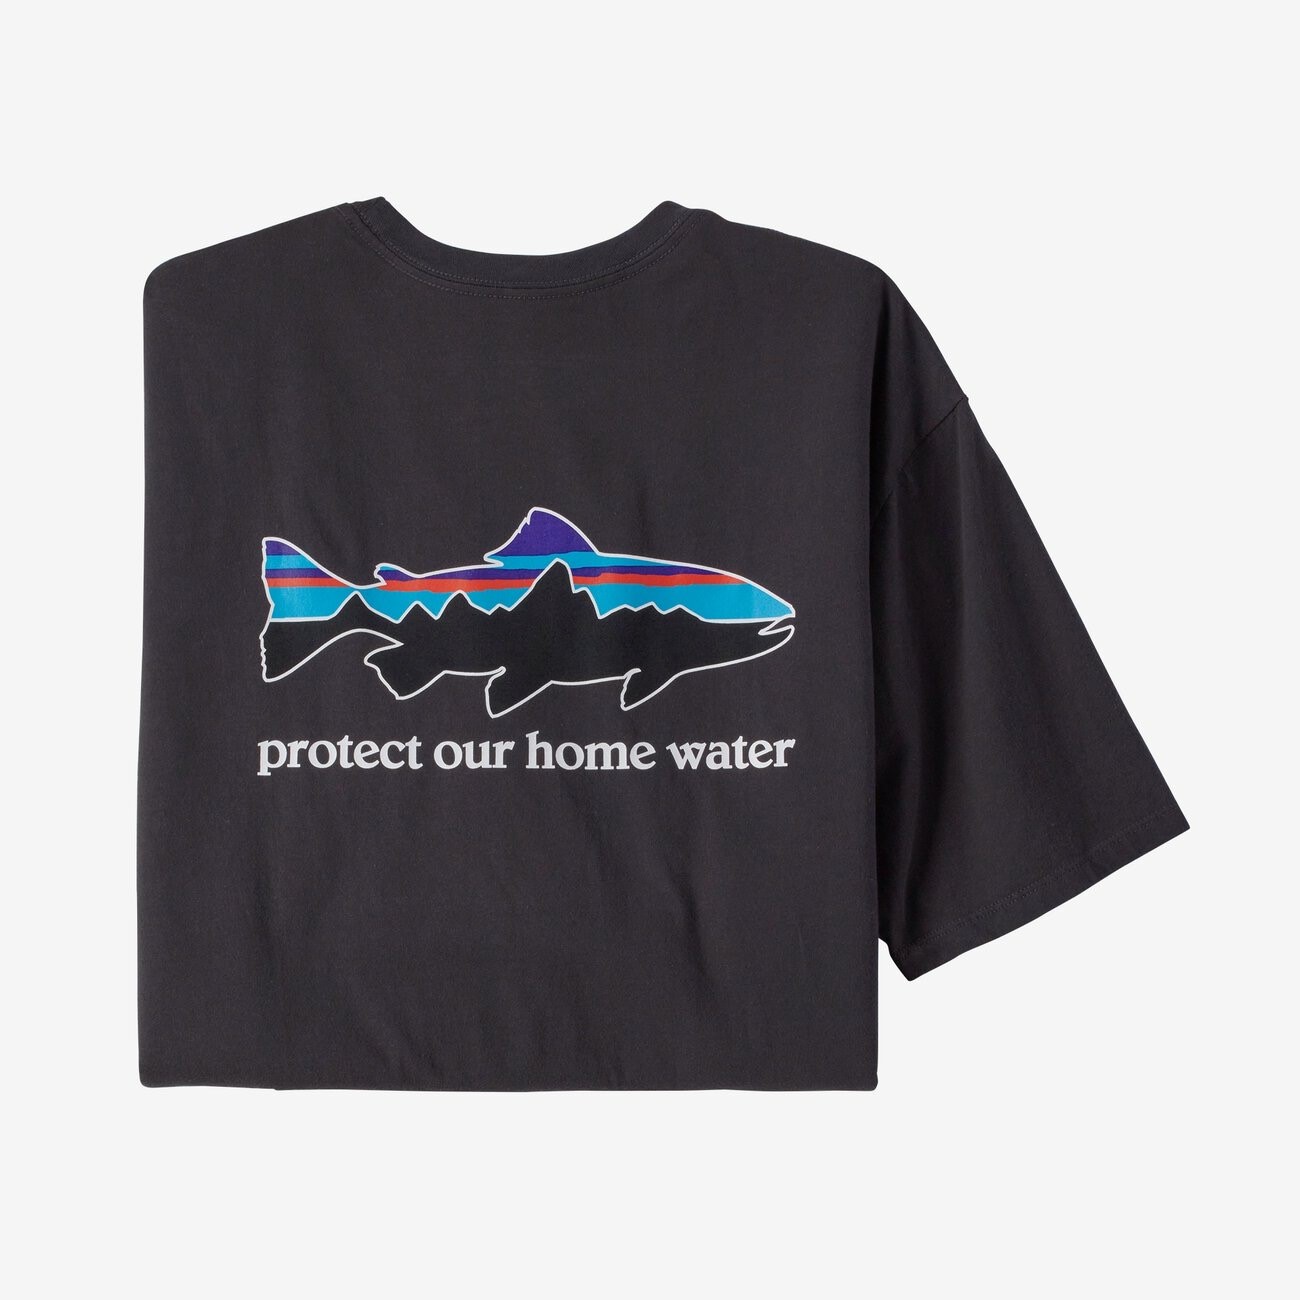 Patagonia M's Home Water Trout Organic T-Shirt - Ink Black - XXL